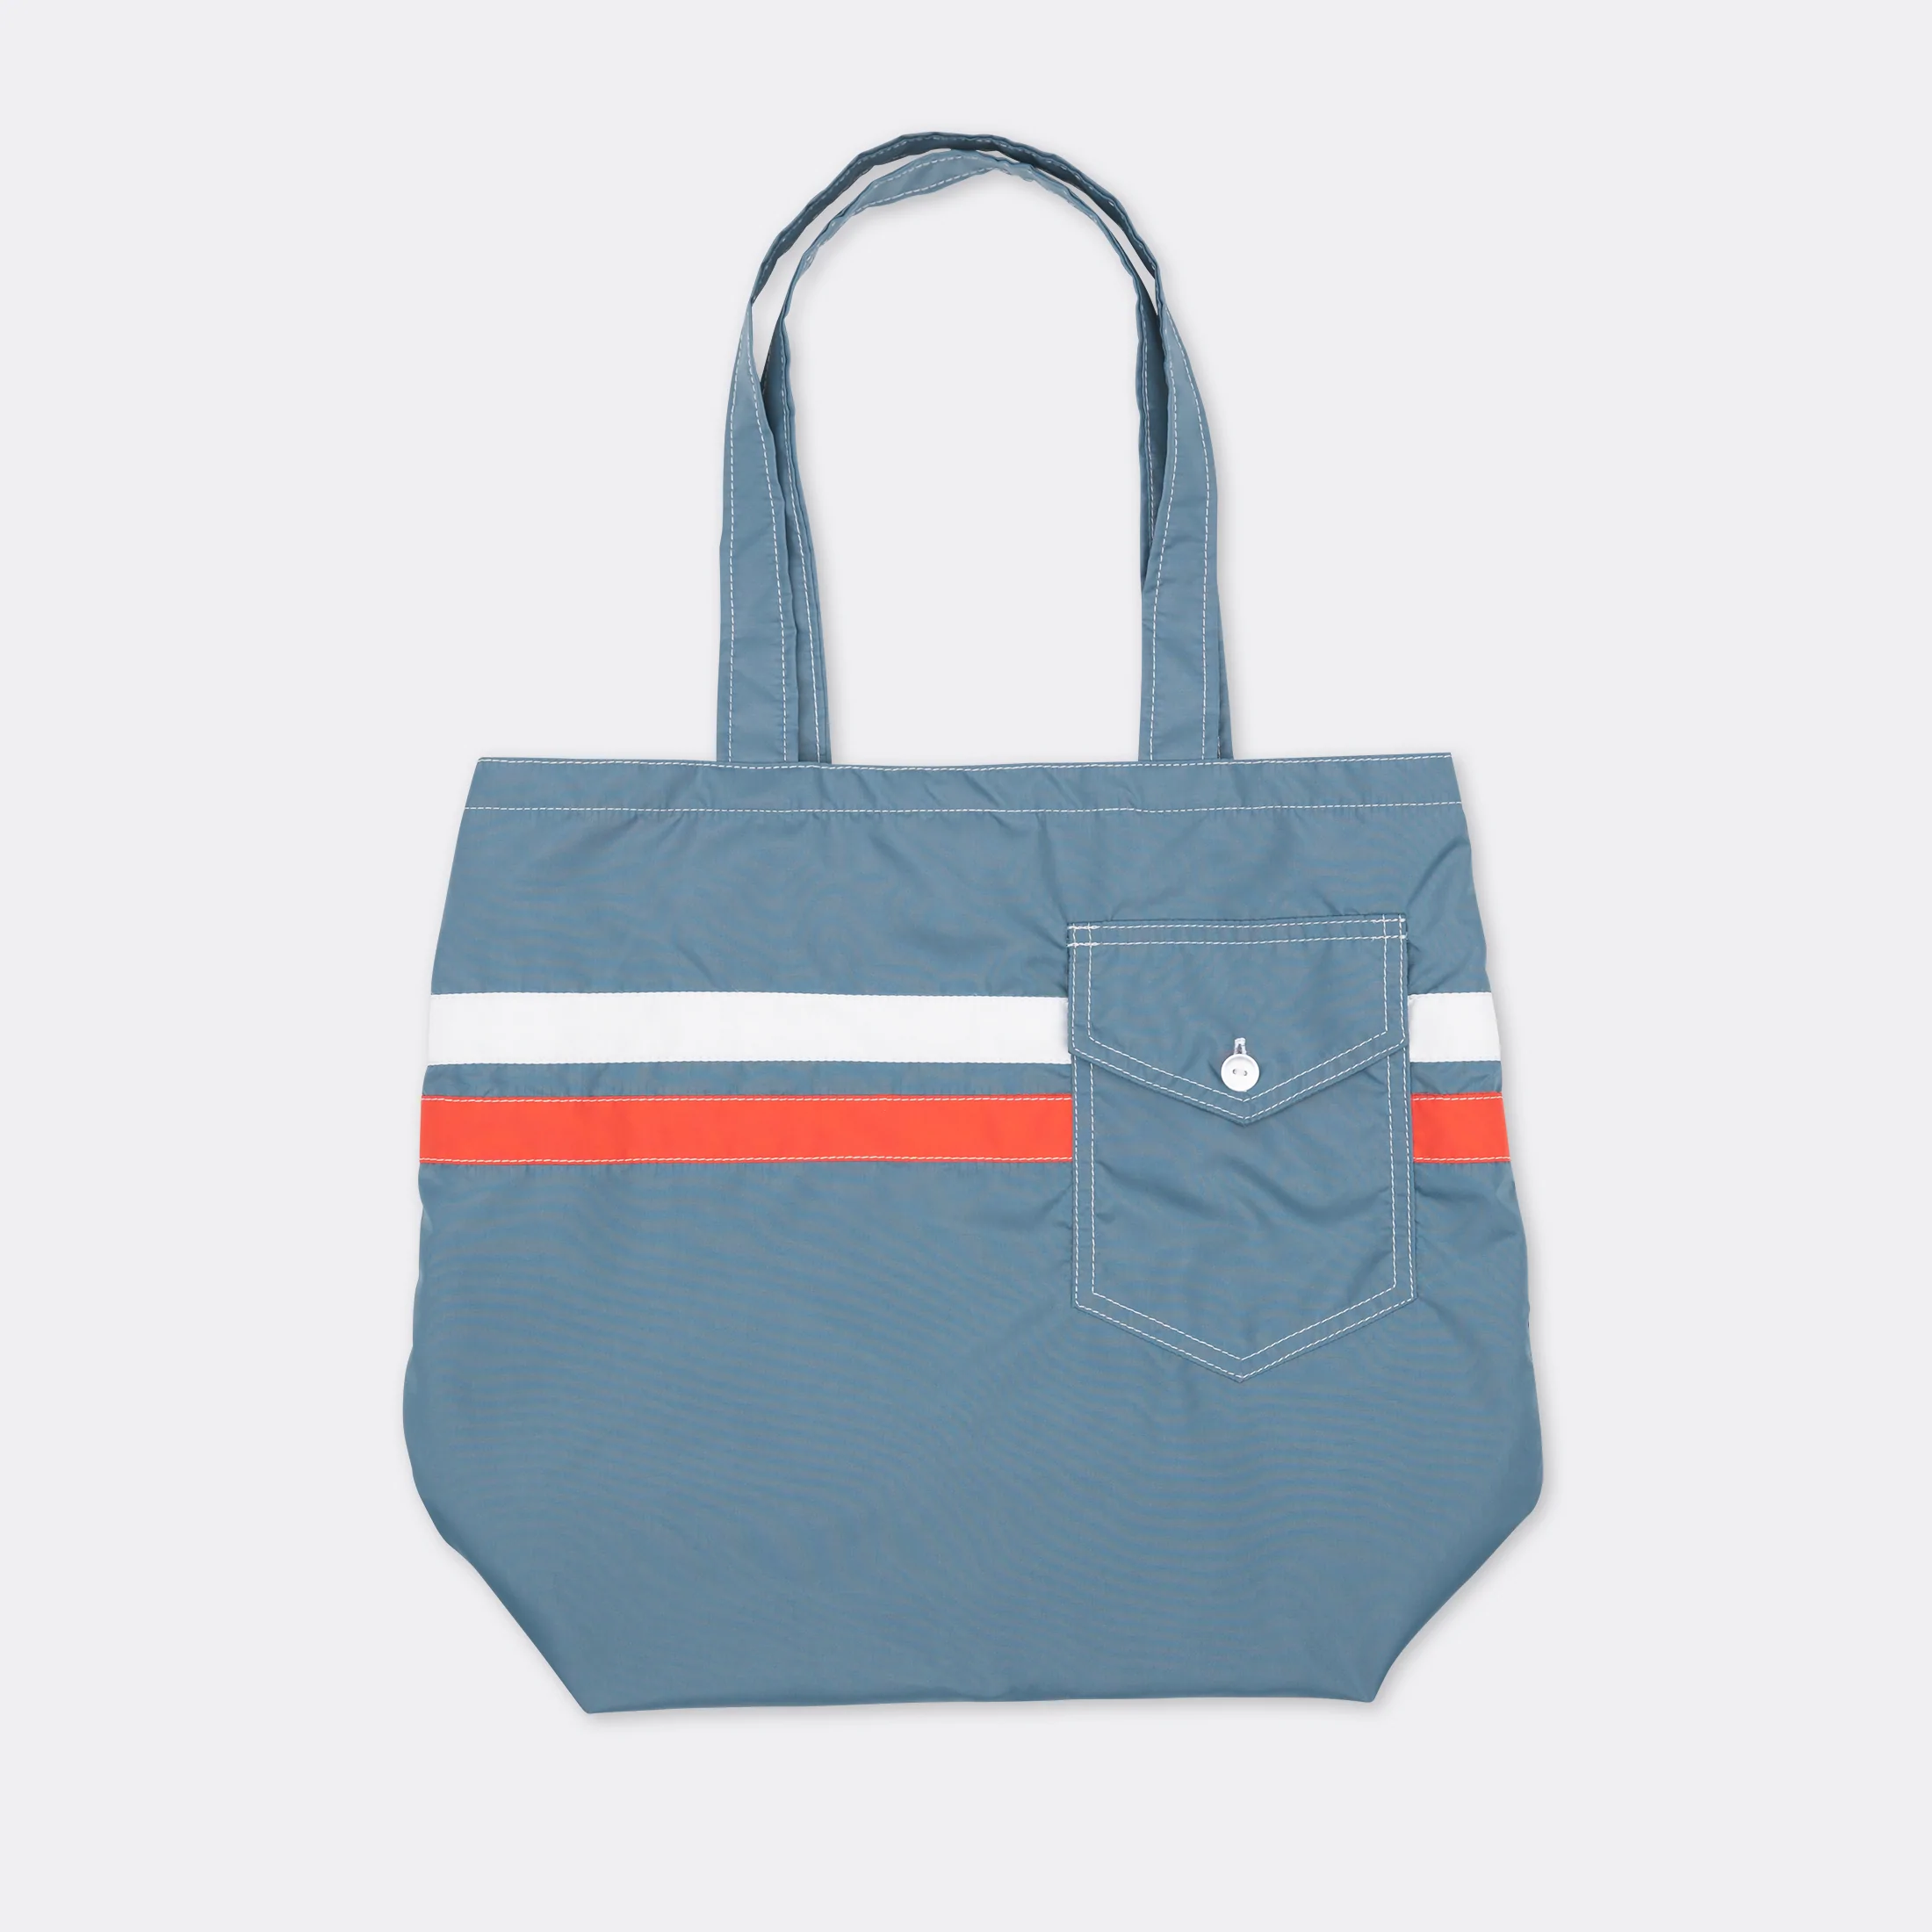 Birdwell tote gift for him